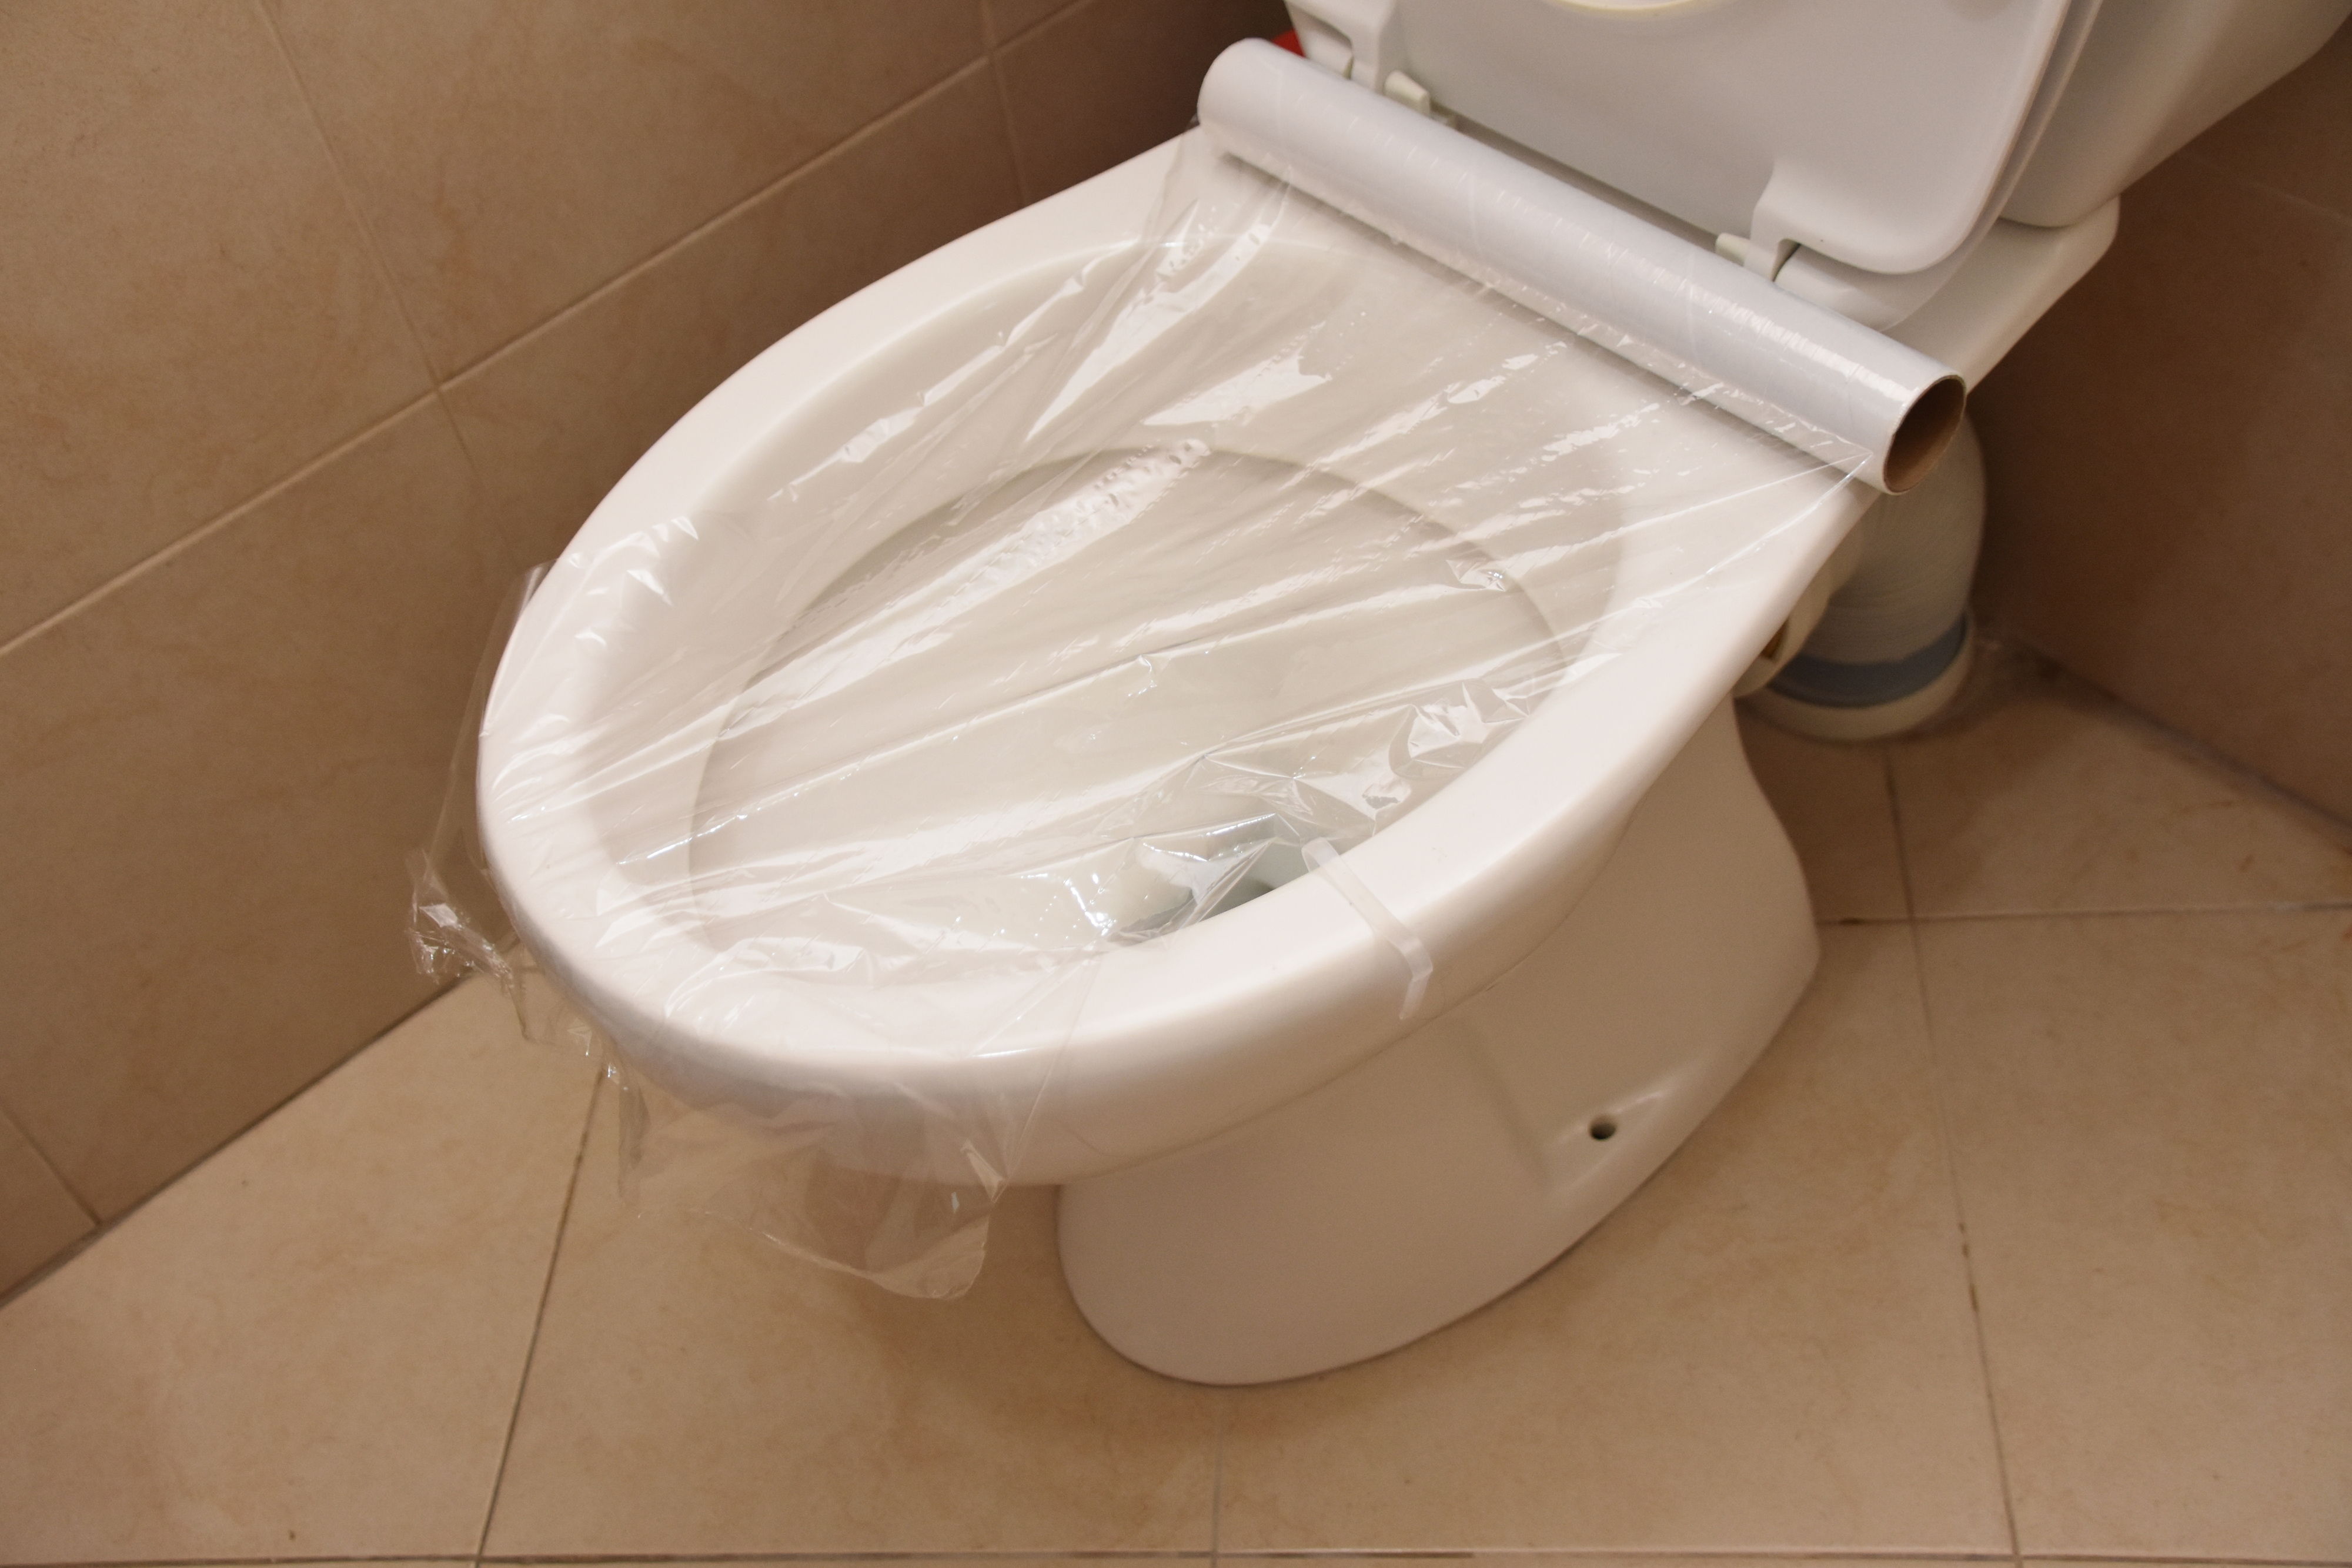 A toilet with plastic wrap covering the top of the bowl